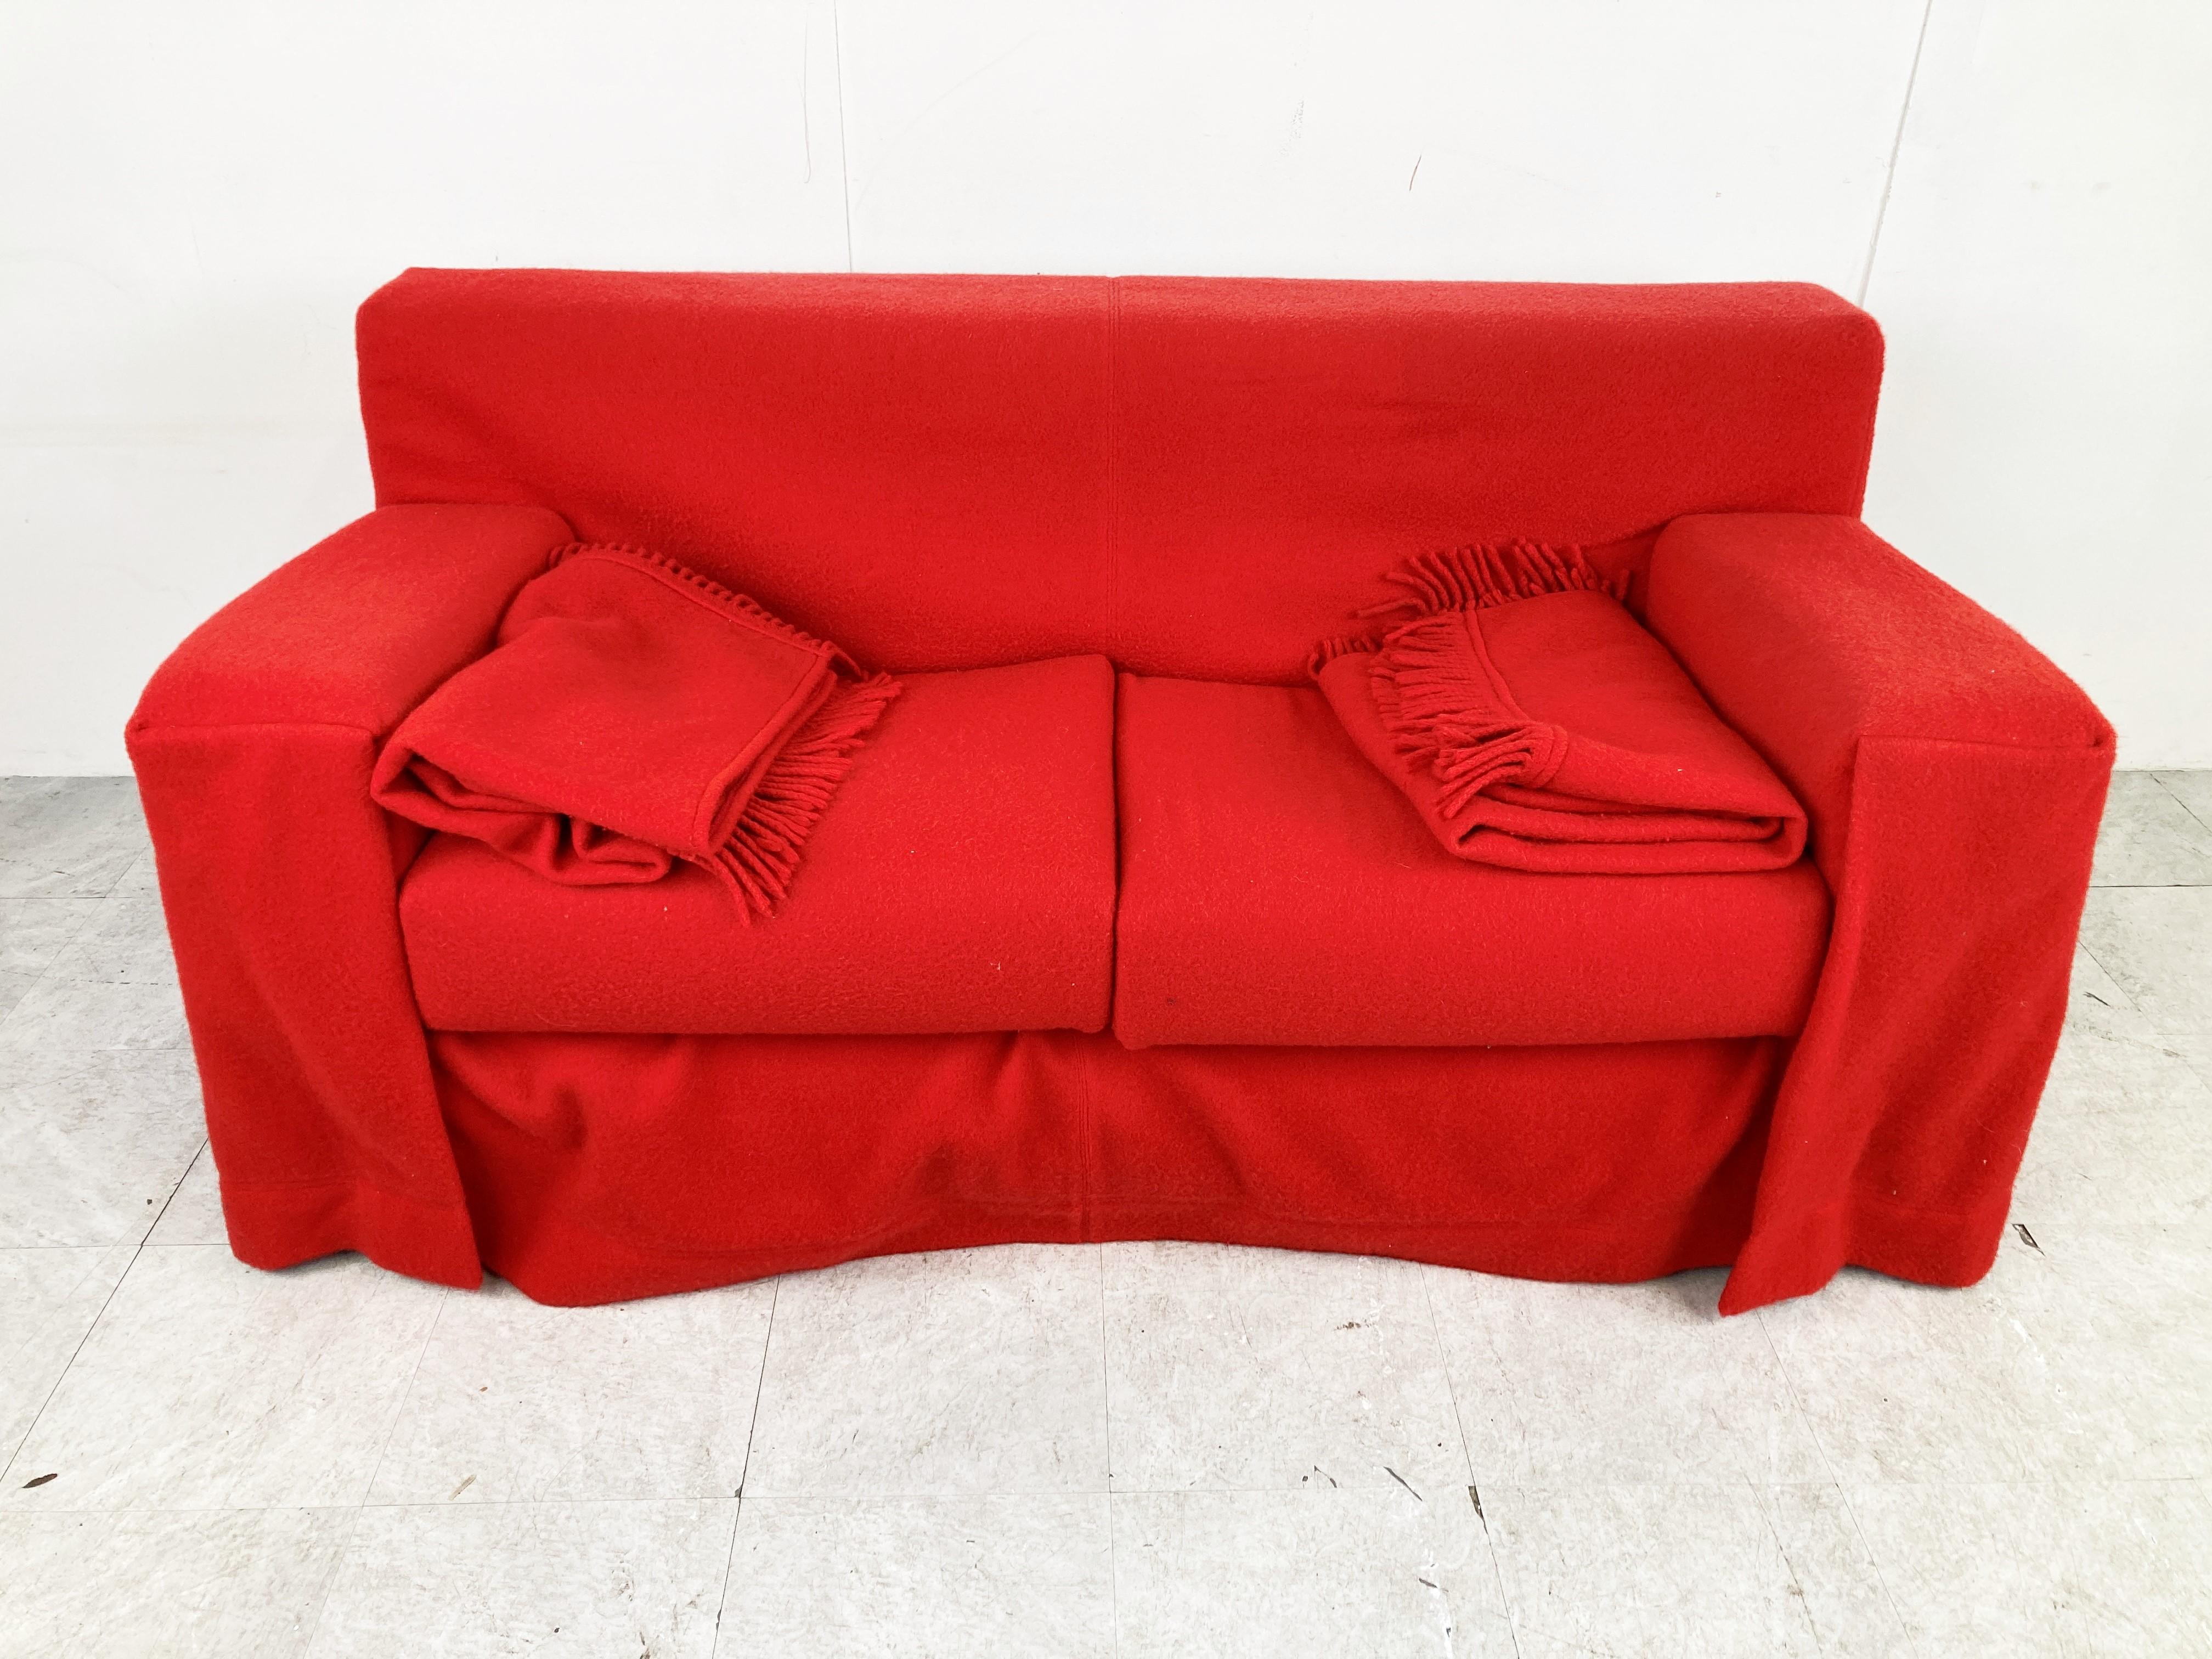 Contemporary design 'Gli Abiti' sofa designed by Ferré and Paolo Nava for B and B Italia.

Beautiful red fabric with the matching blankets.

This sofa was created when when Piero Busnelli, founder of B&B Italia commissioned a fashion designer,